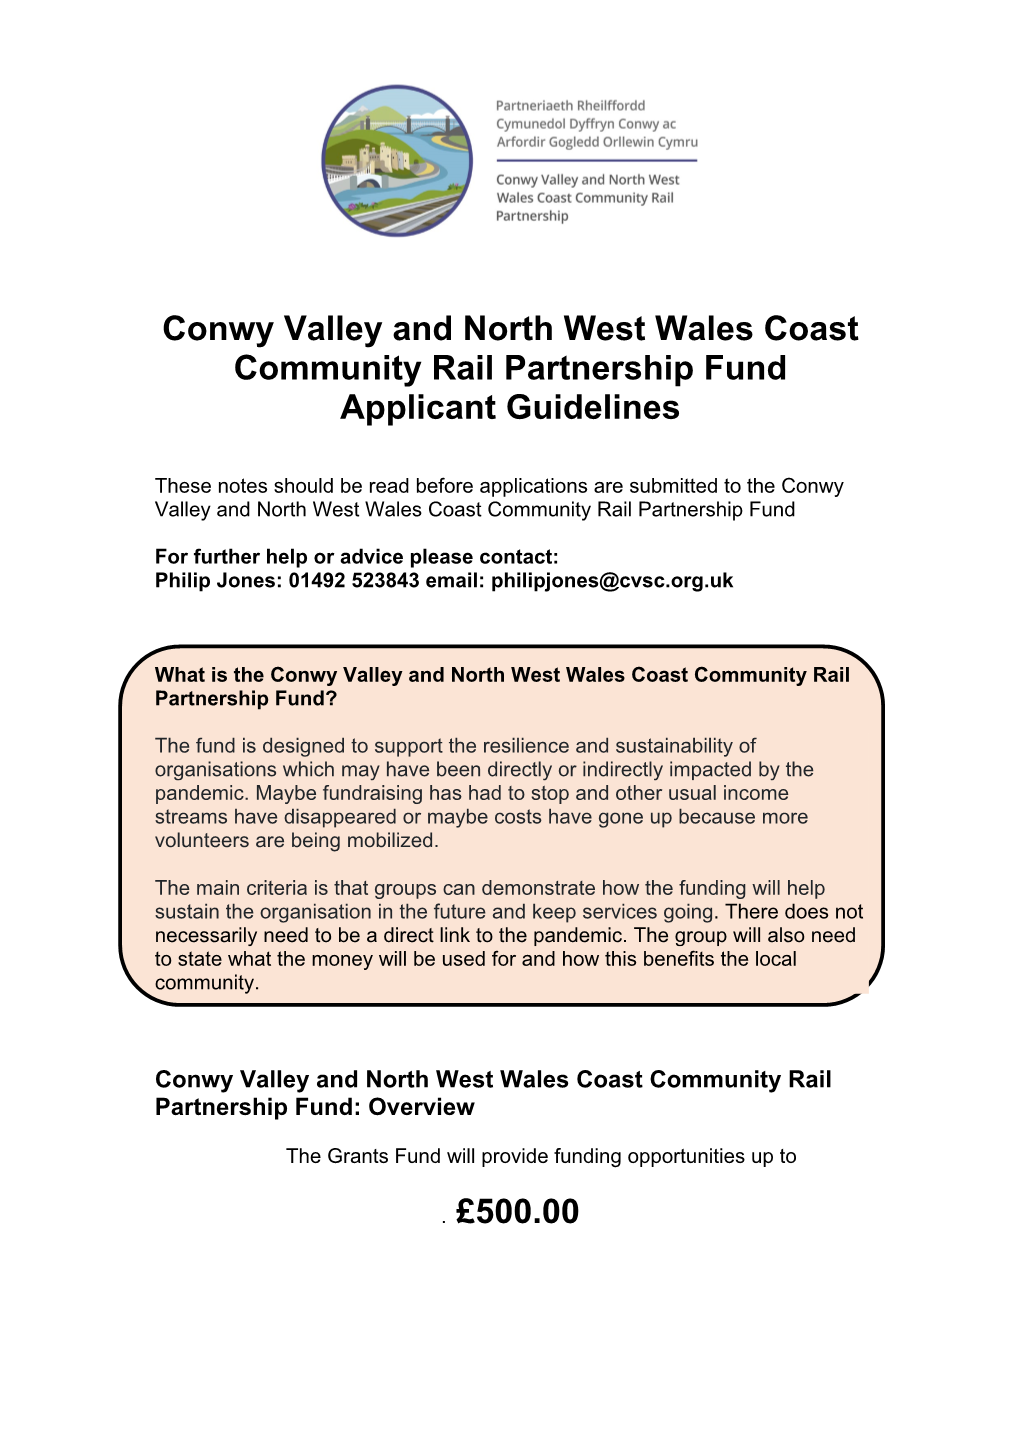 Conwy Valley and North West Wales Coast Community Rail Partnership Fund Applicant Guidelines